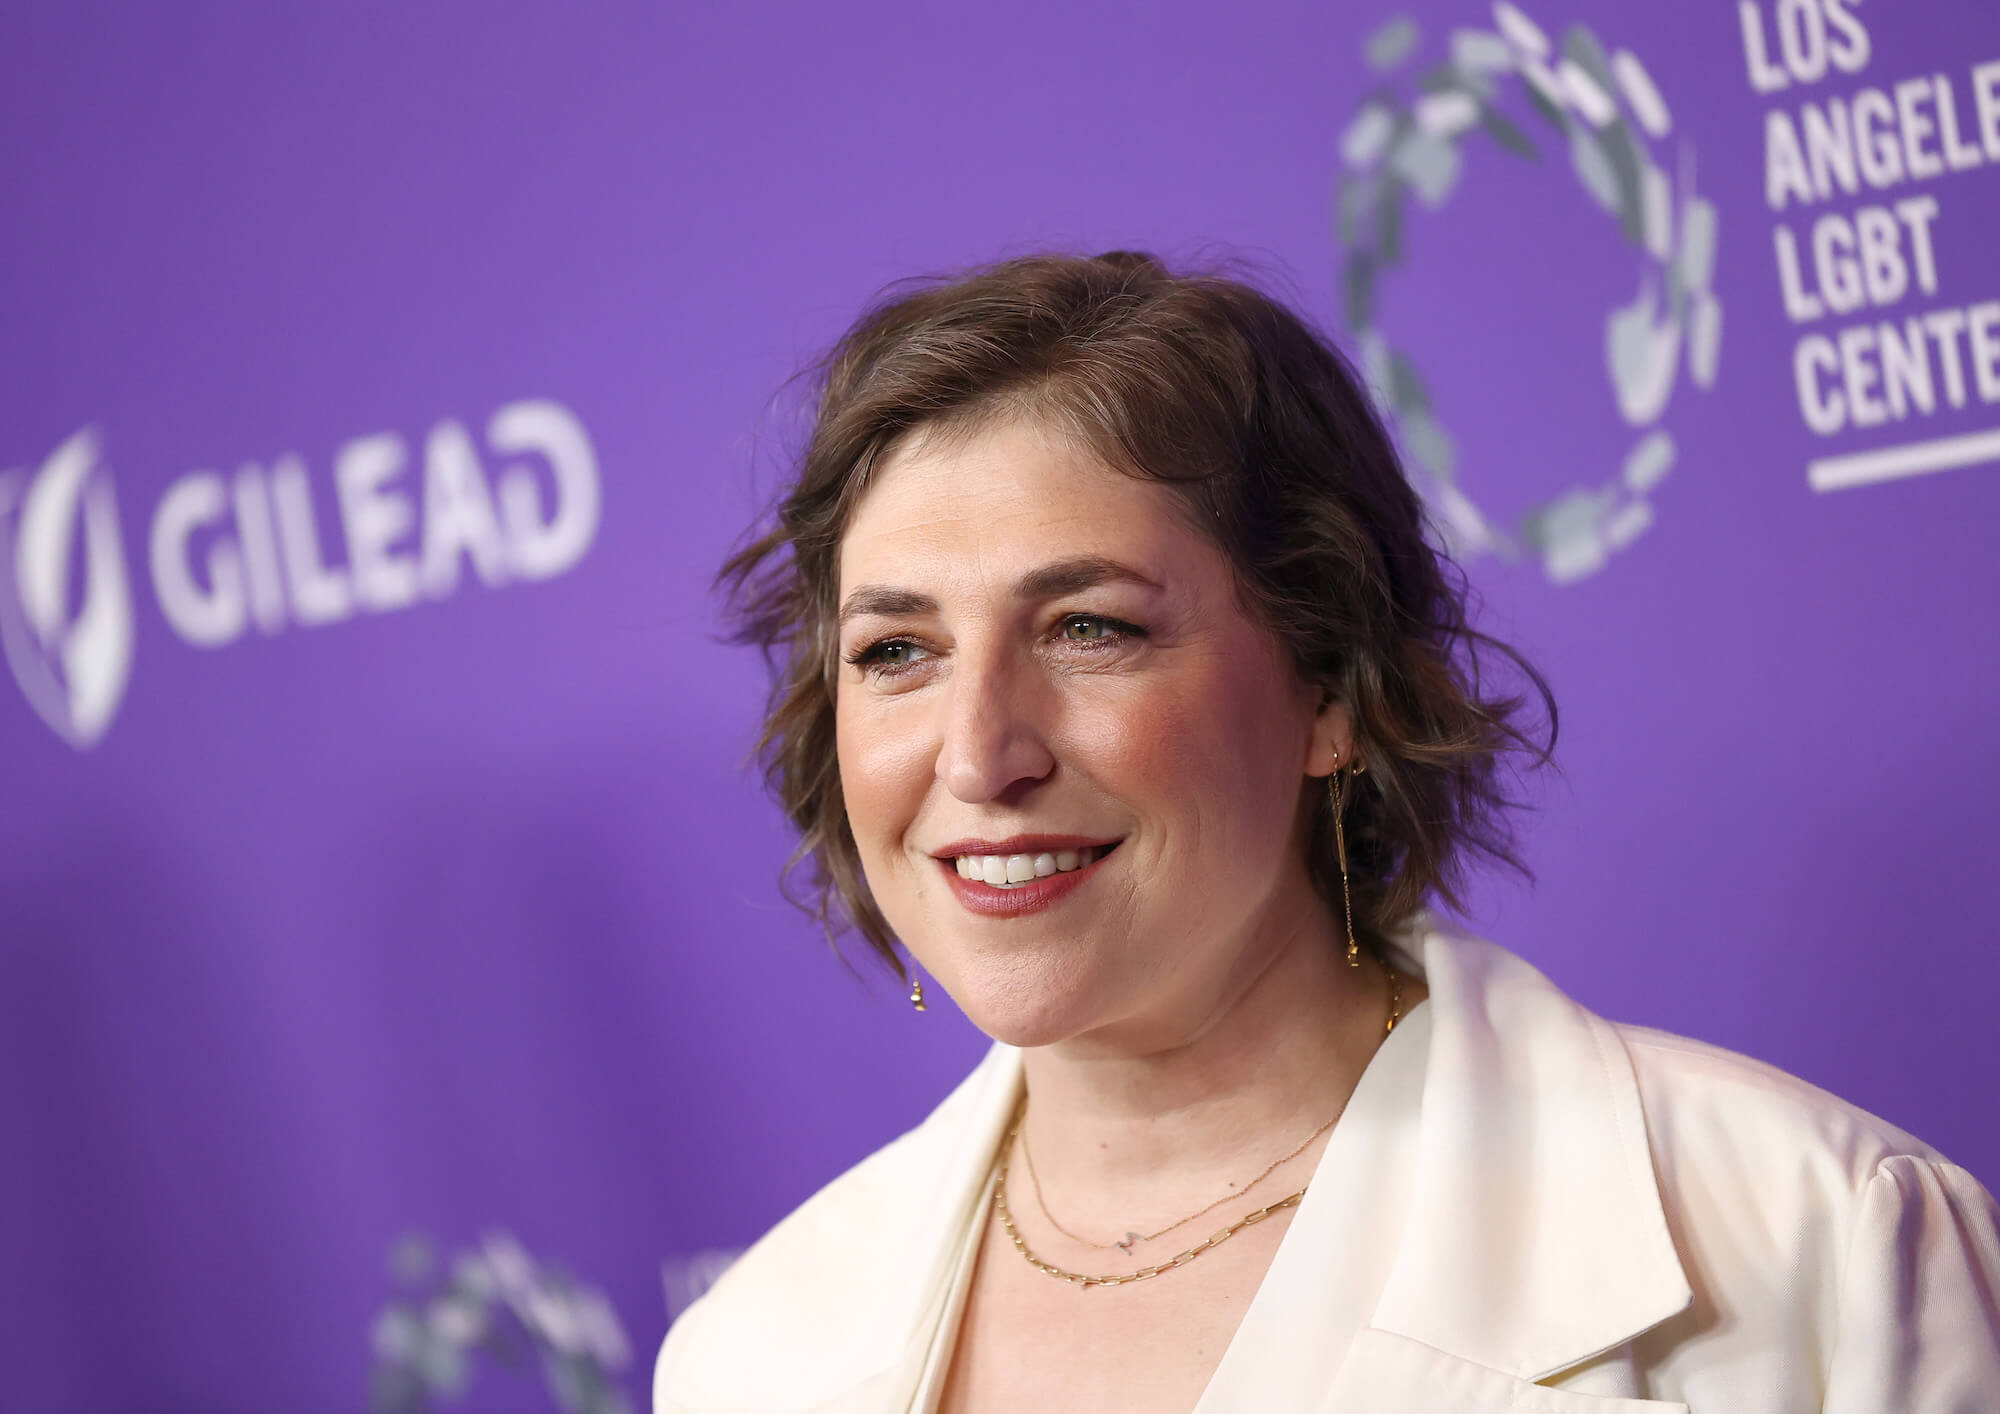 Mayim Bialik from 'Jeopardy!' against a purple background